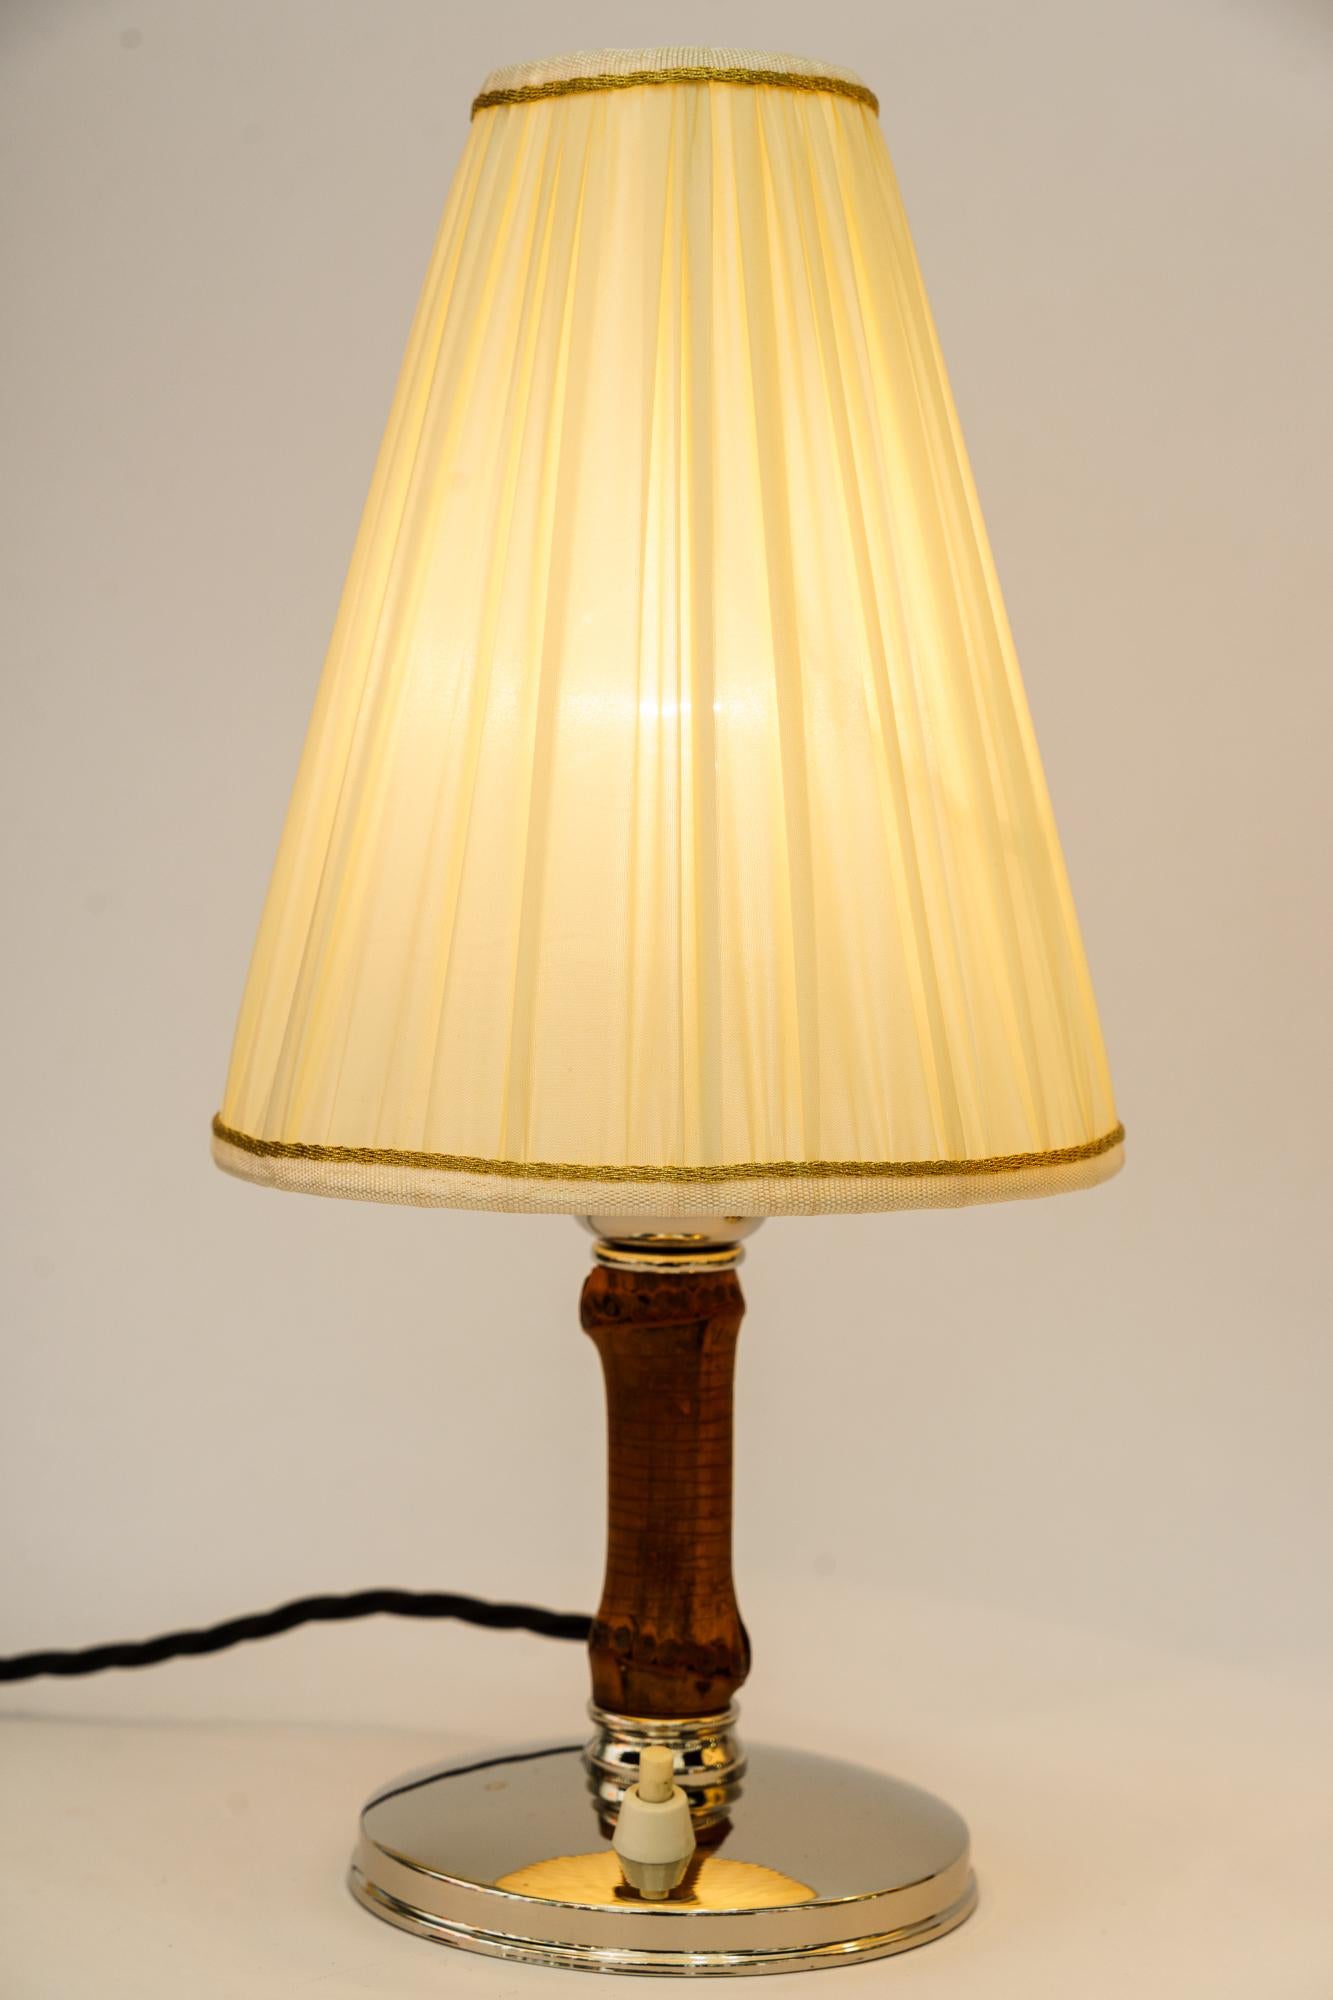 2 Rupert Nikoll Table Lamps with Fabric Shades Vienna Around 1950s 2